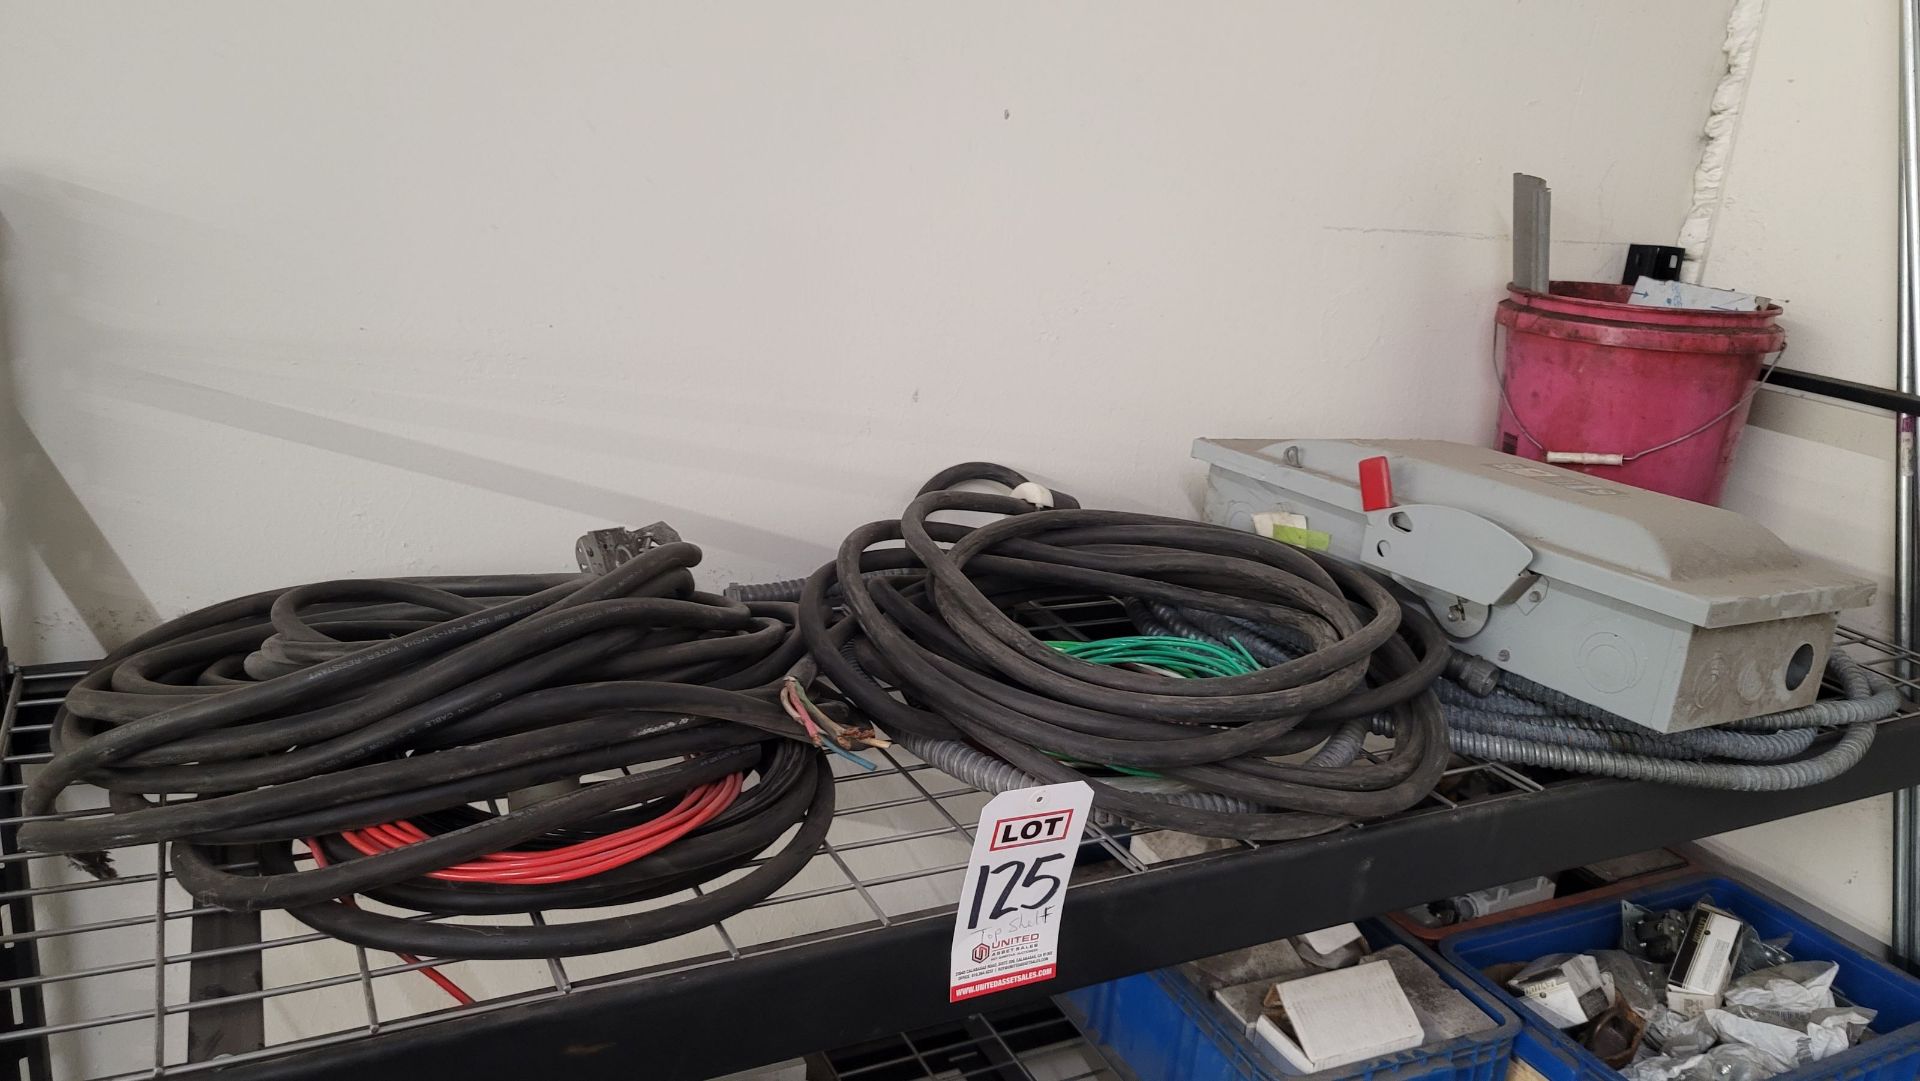 LOT - CONTENTS ONLY OF TOP SHELF OF RACK, TO CONTAIN HEAVY ELECTRIC CABLE, SAFETY SWITCH, FLEX